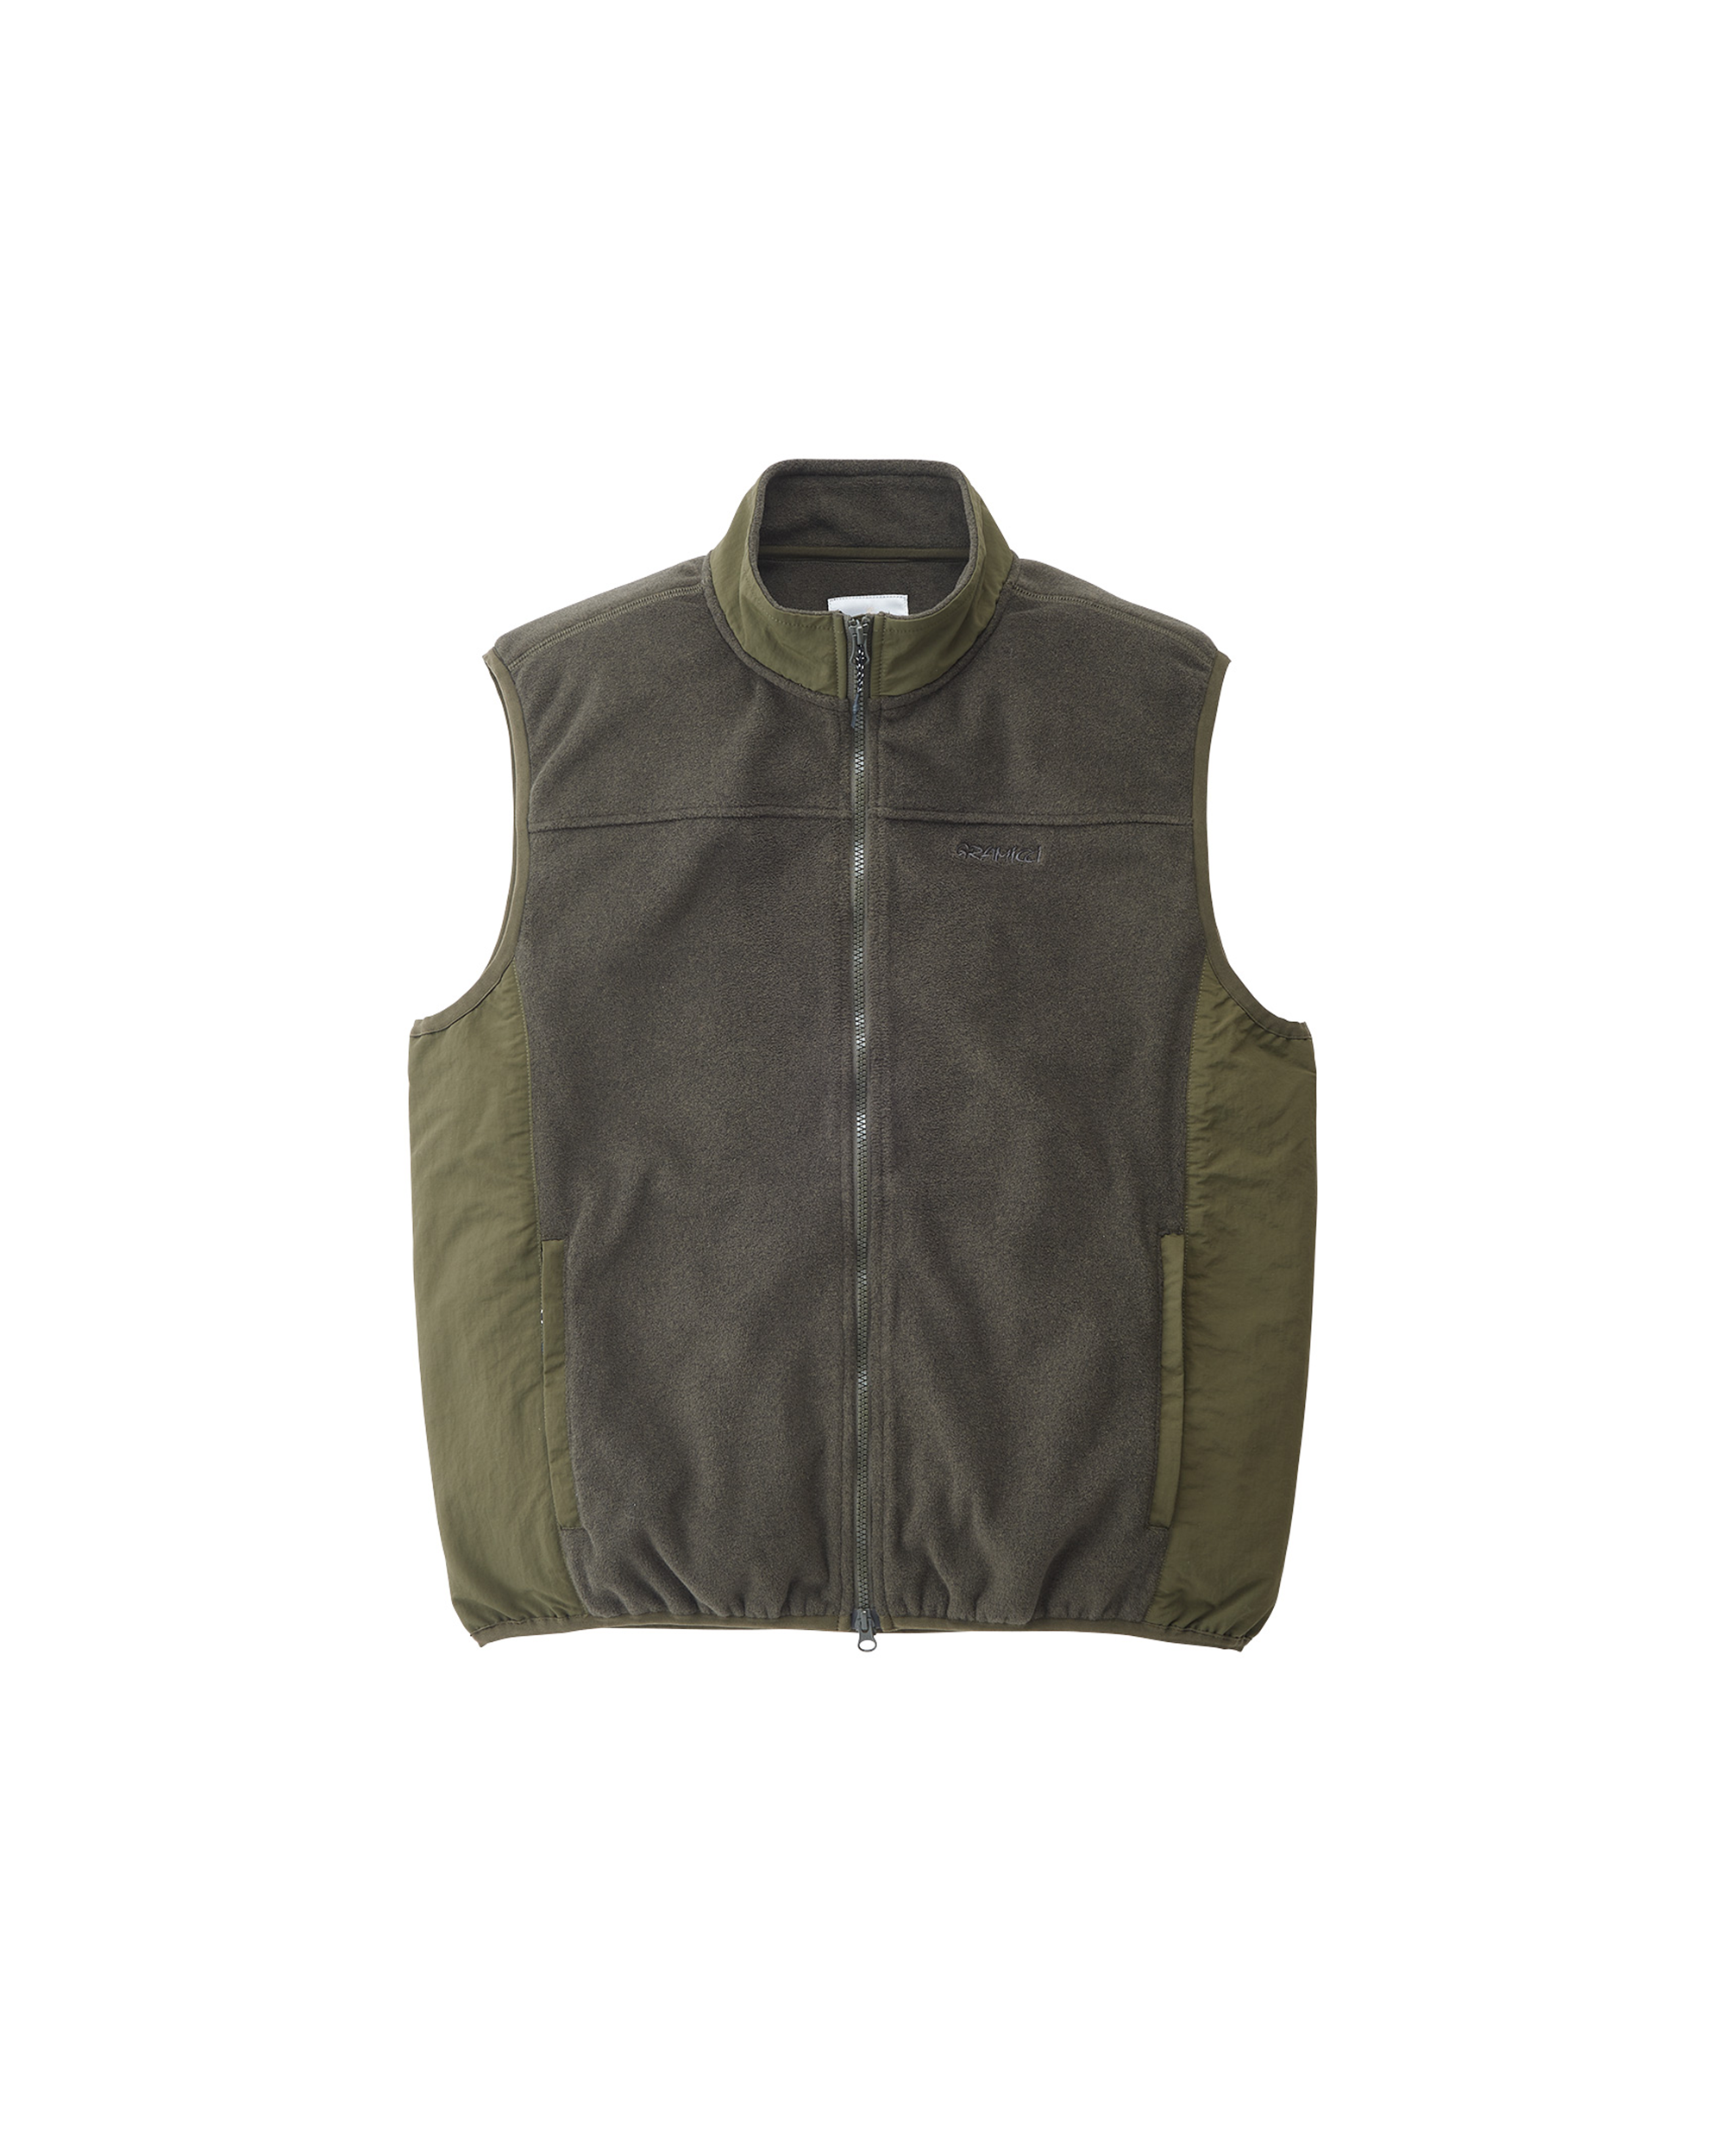 Polartec® Vest - Olive – HIGHS AND LOWS